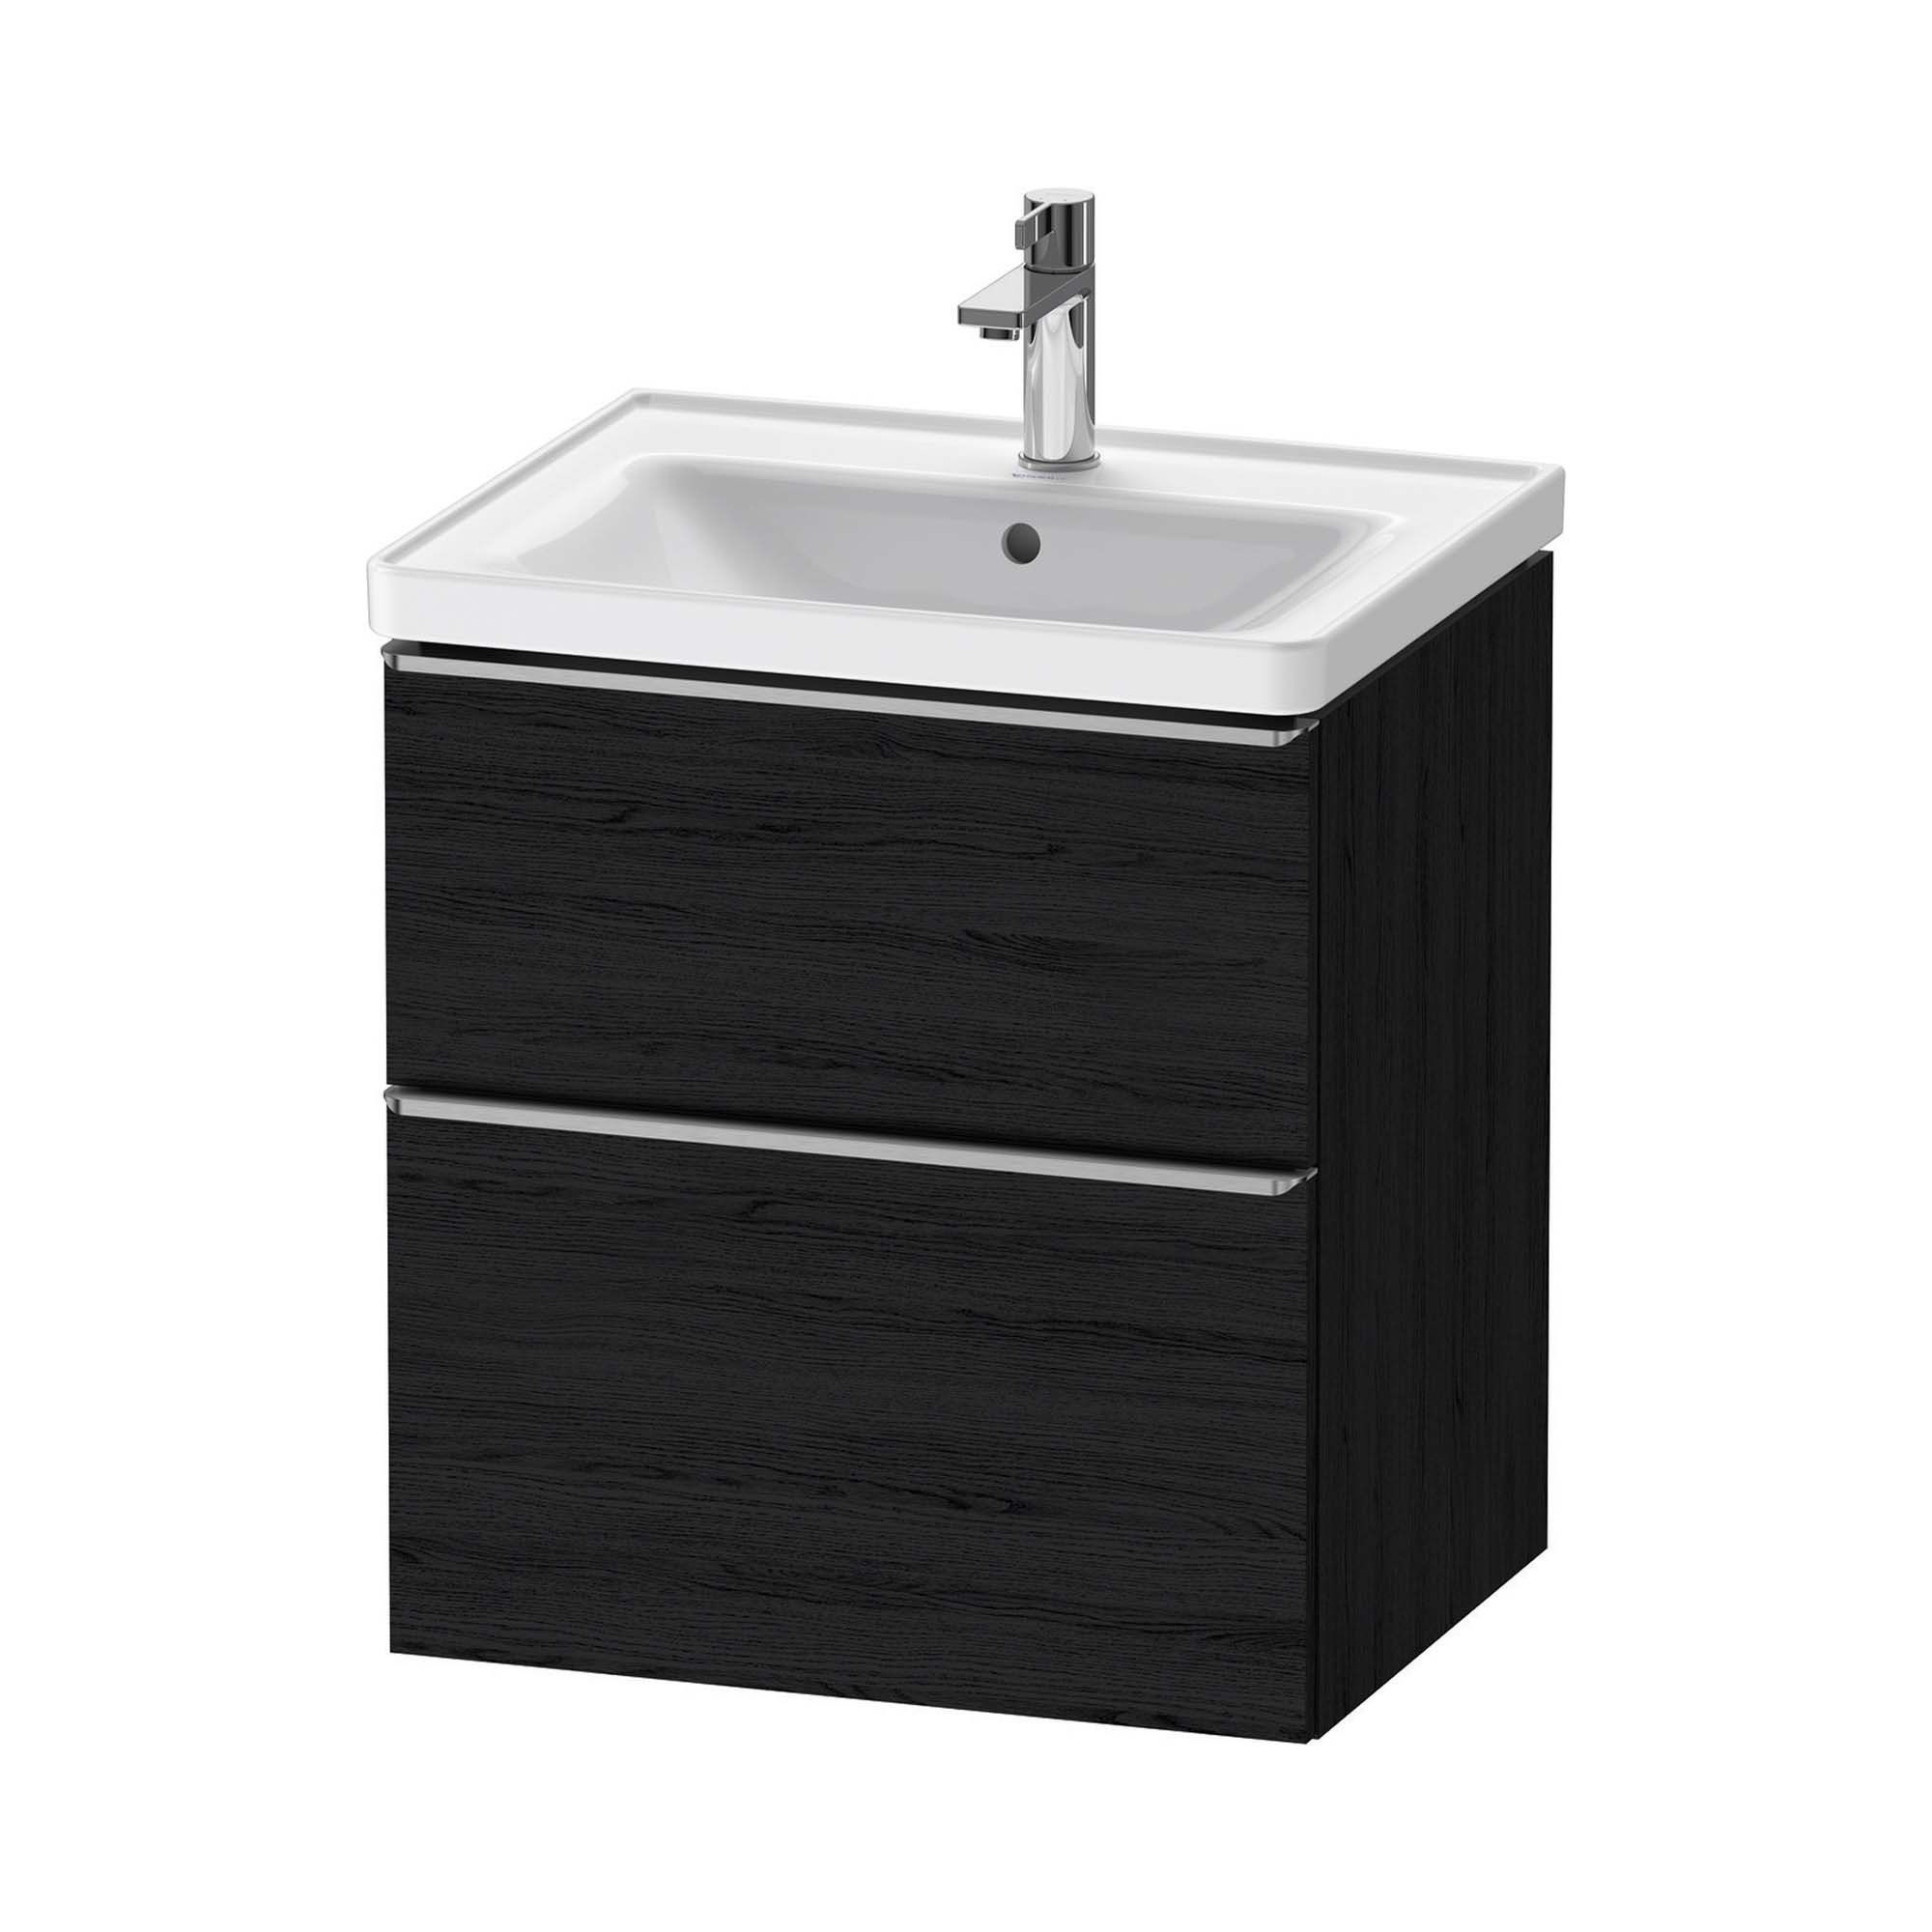 duravit d-neo 600 wall mounted vanity unit with d-neo basin black oak stainless steel handles